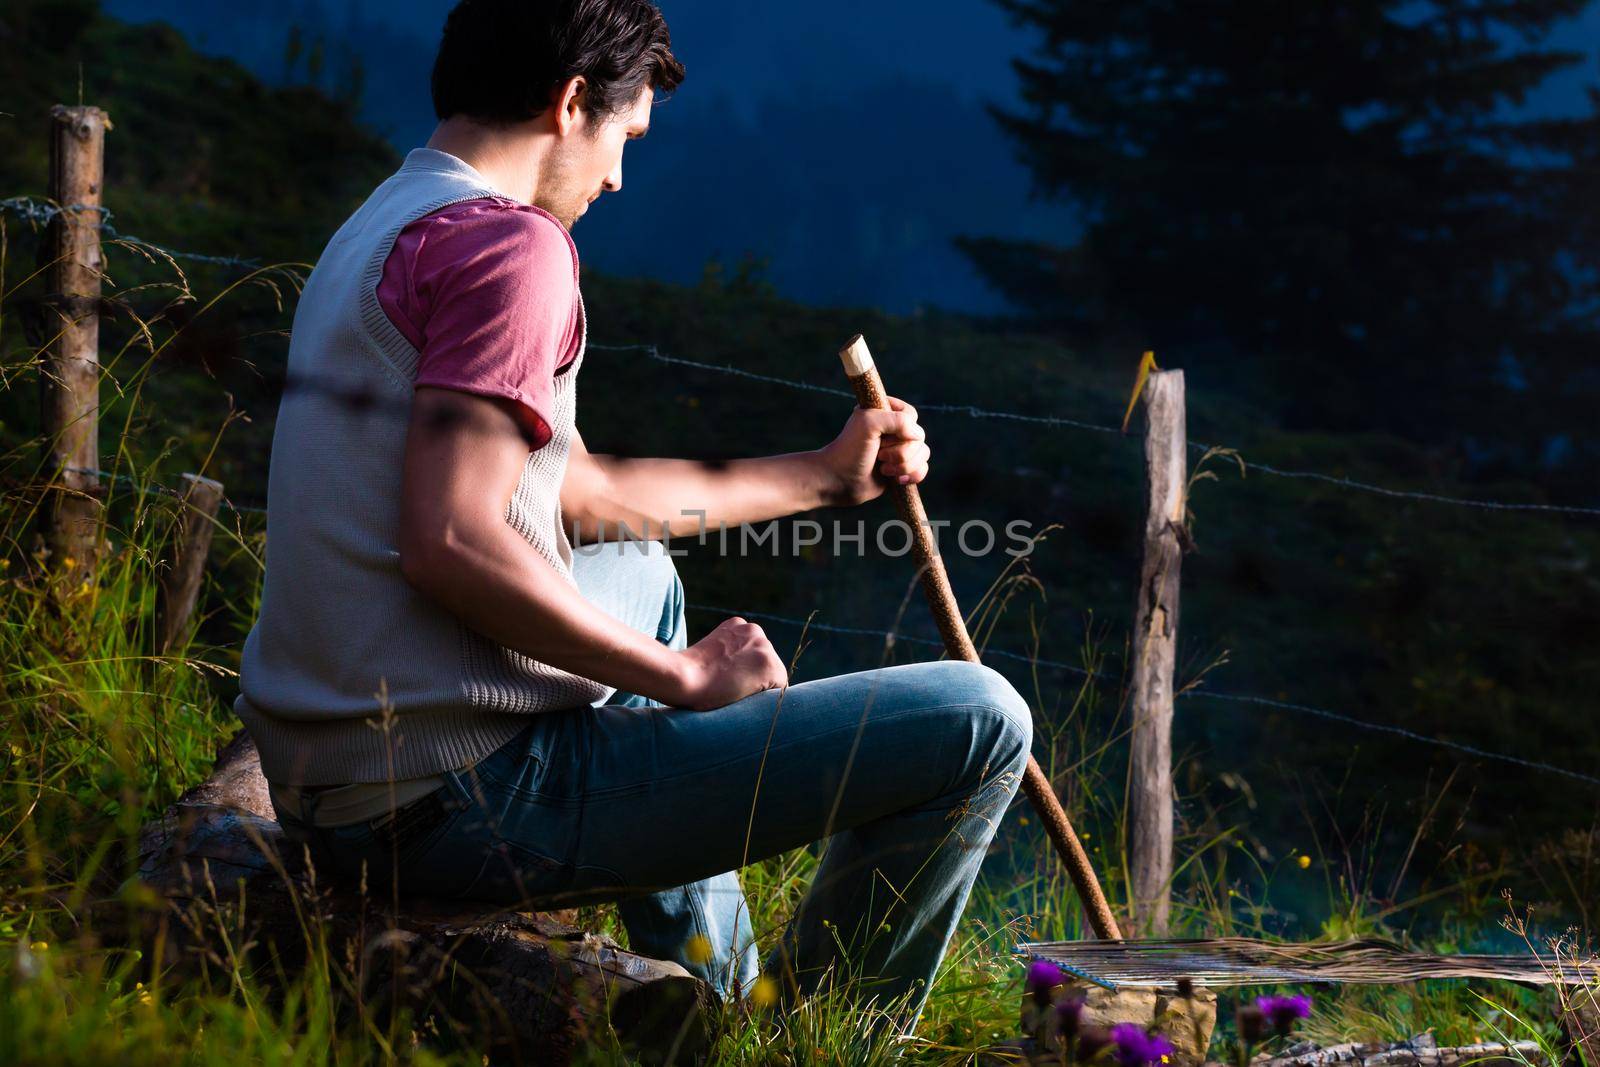 Tyrol - Young man sitting on alpine meadow of a mountain on Campfire in the Bavarian Alps and enjoys the romantic evening sunset of the panorama in leisure time or vacation